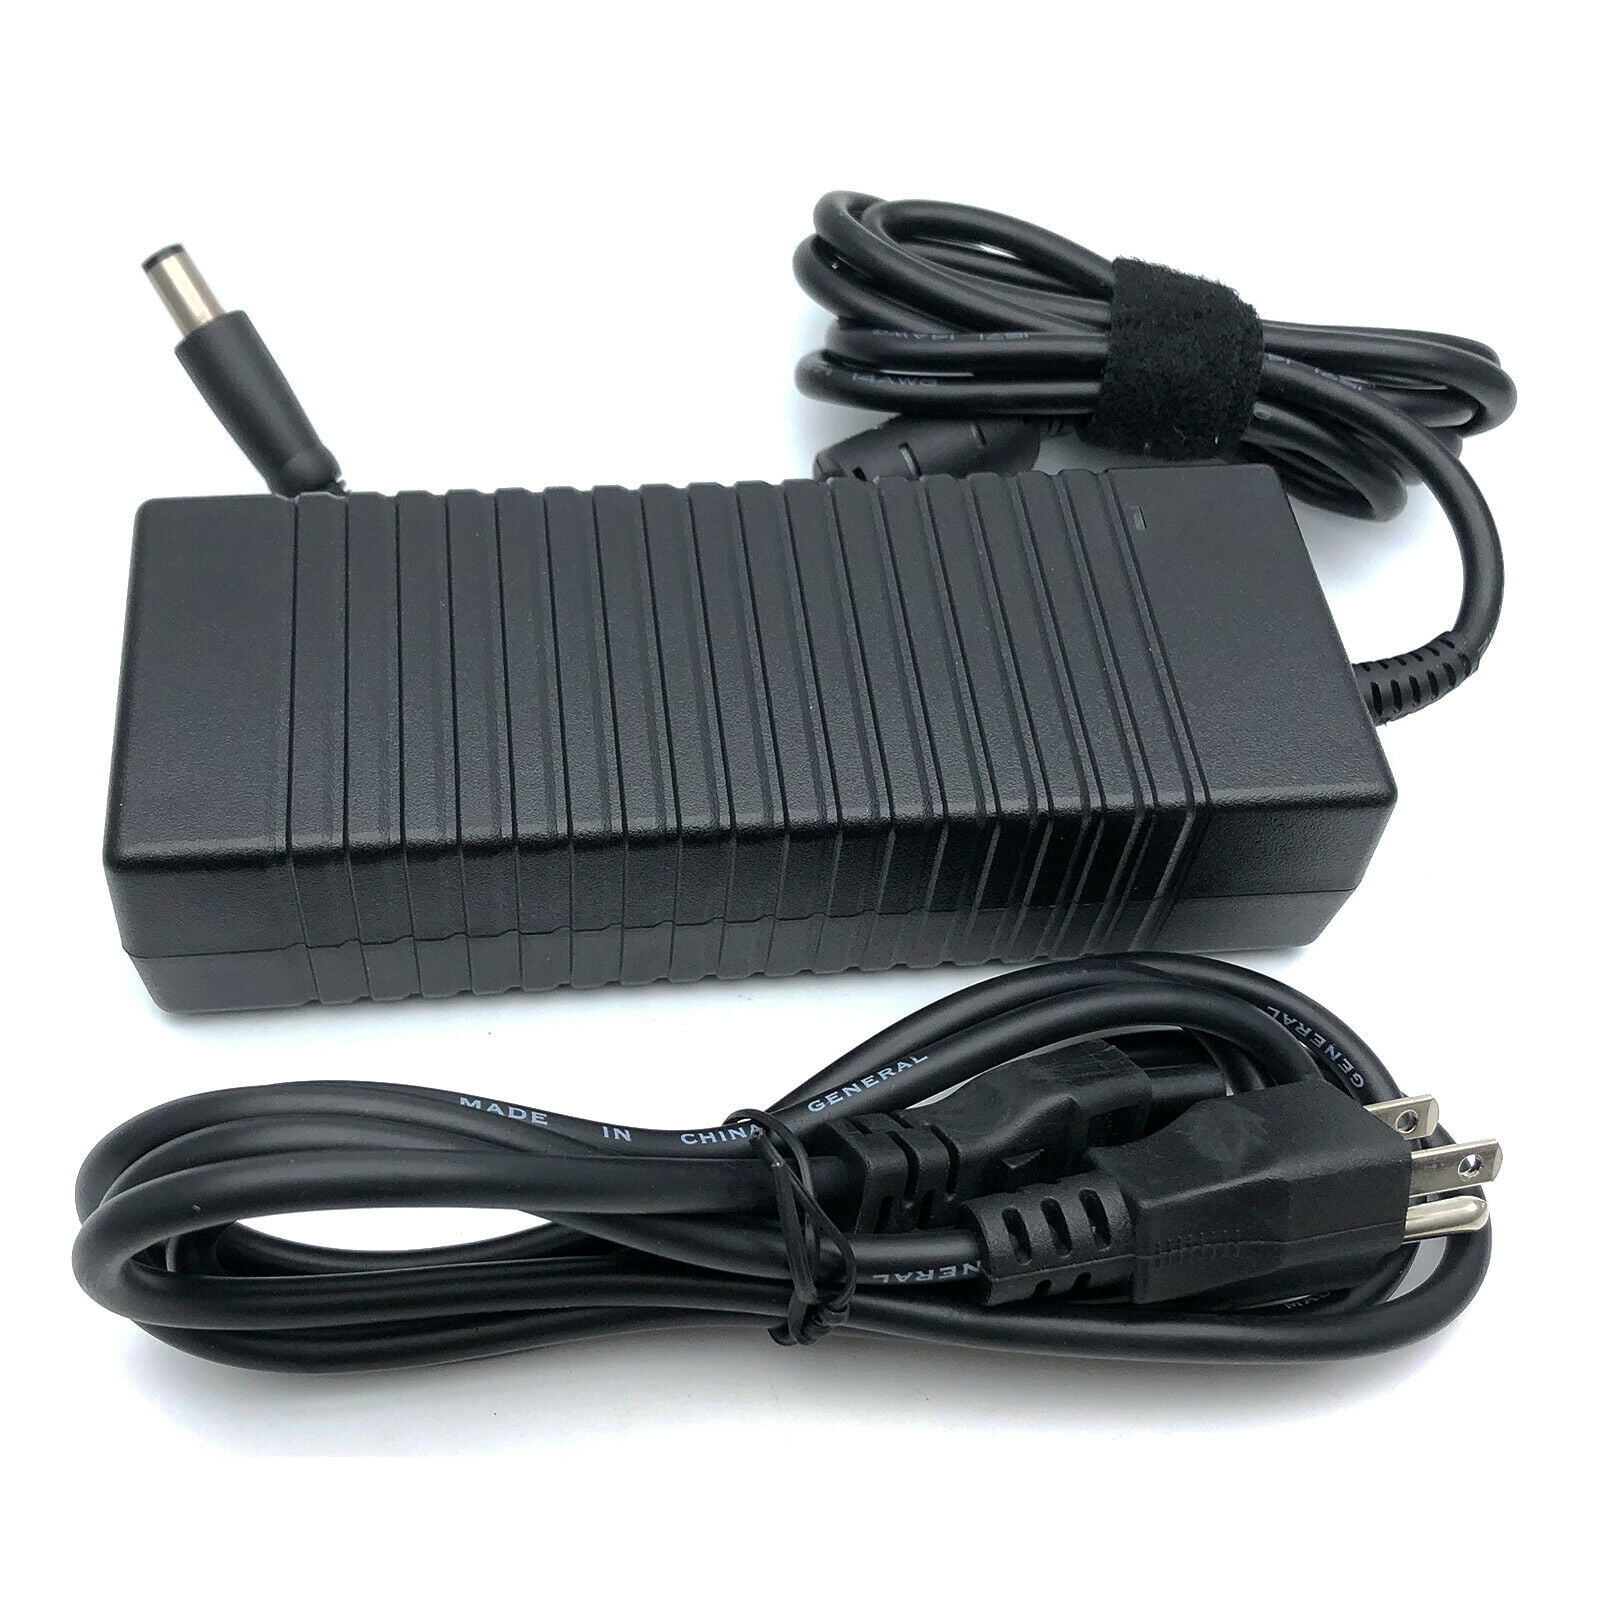 Genuine DELL Inspiron 15 5577 7557 7559 7566 7567 7577 130W AC Charger Adapter 